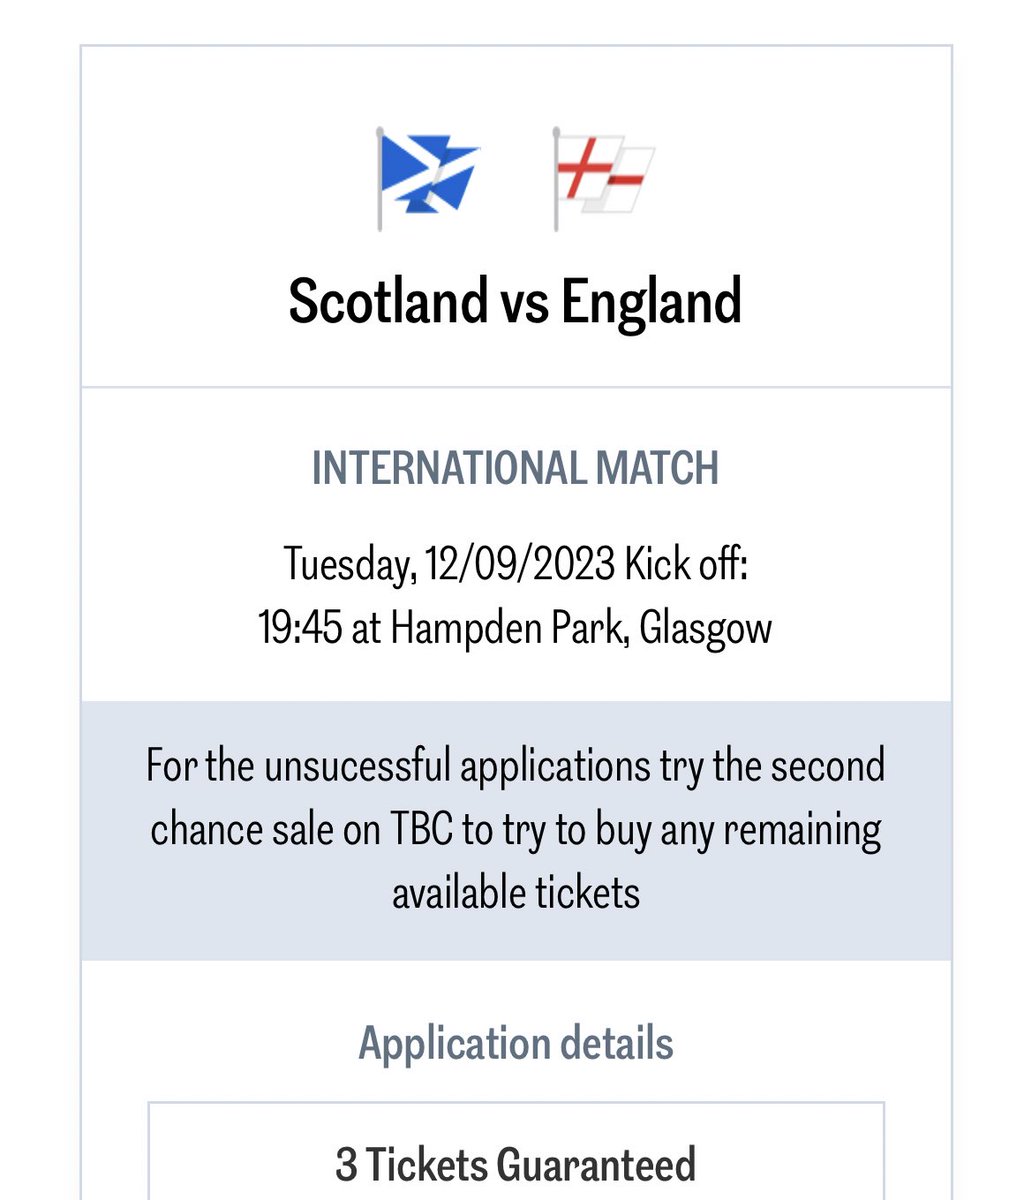 🏴󠁧󠁢󠁳󠁣󠁴󠁿 Scotland Away tickets are out! 🤯 11,197 applicants for 2,901 tickets